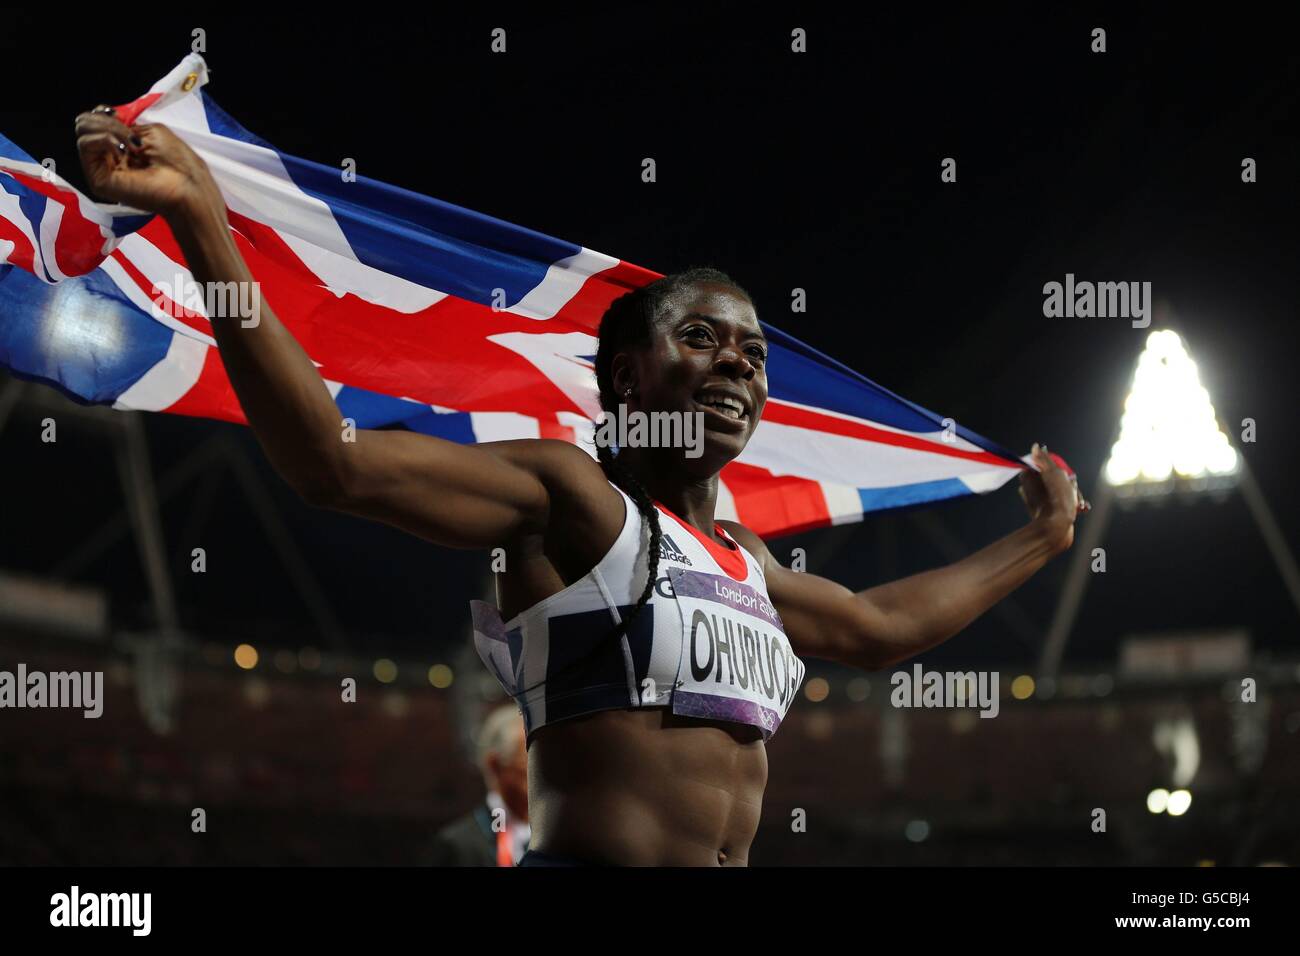 London Olympic Games - Day 9. Great Britain's Christine Ohuruogu celebrates her silver medal in the Women 400m Final at Olympic Stadium, London. Stock Photo